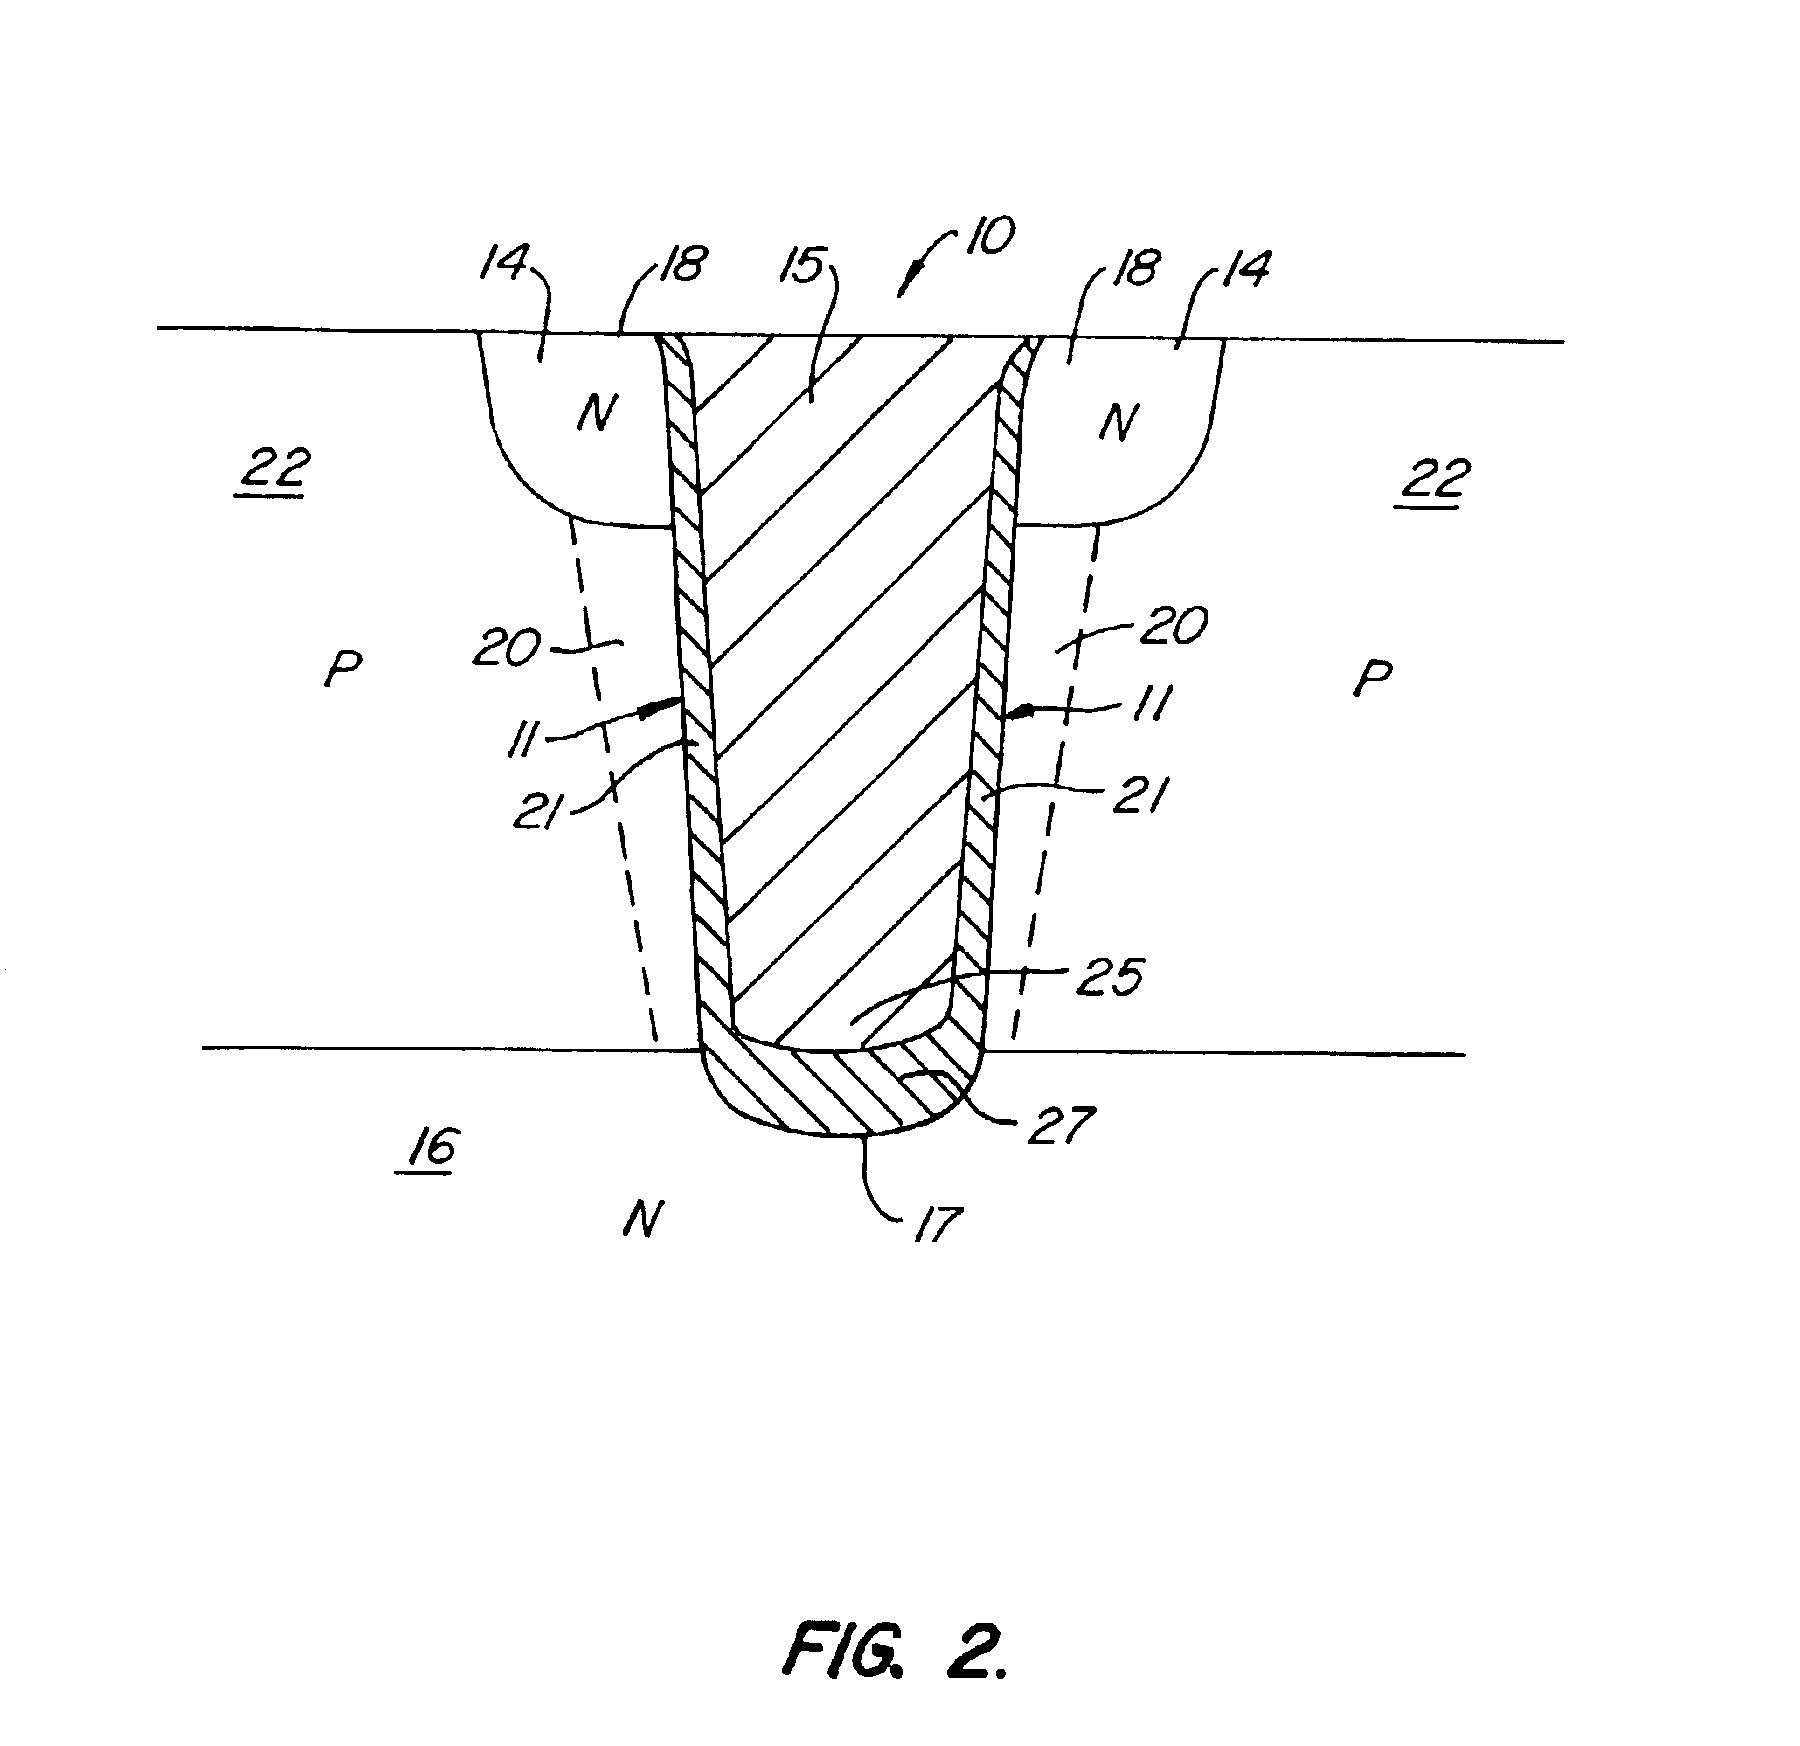 Method for creating thick oxide on the bottom surface of a trench structure in silicon